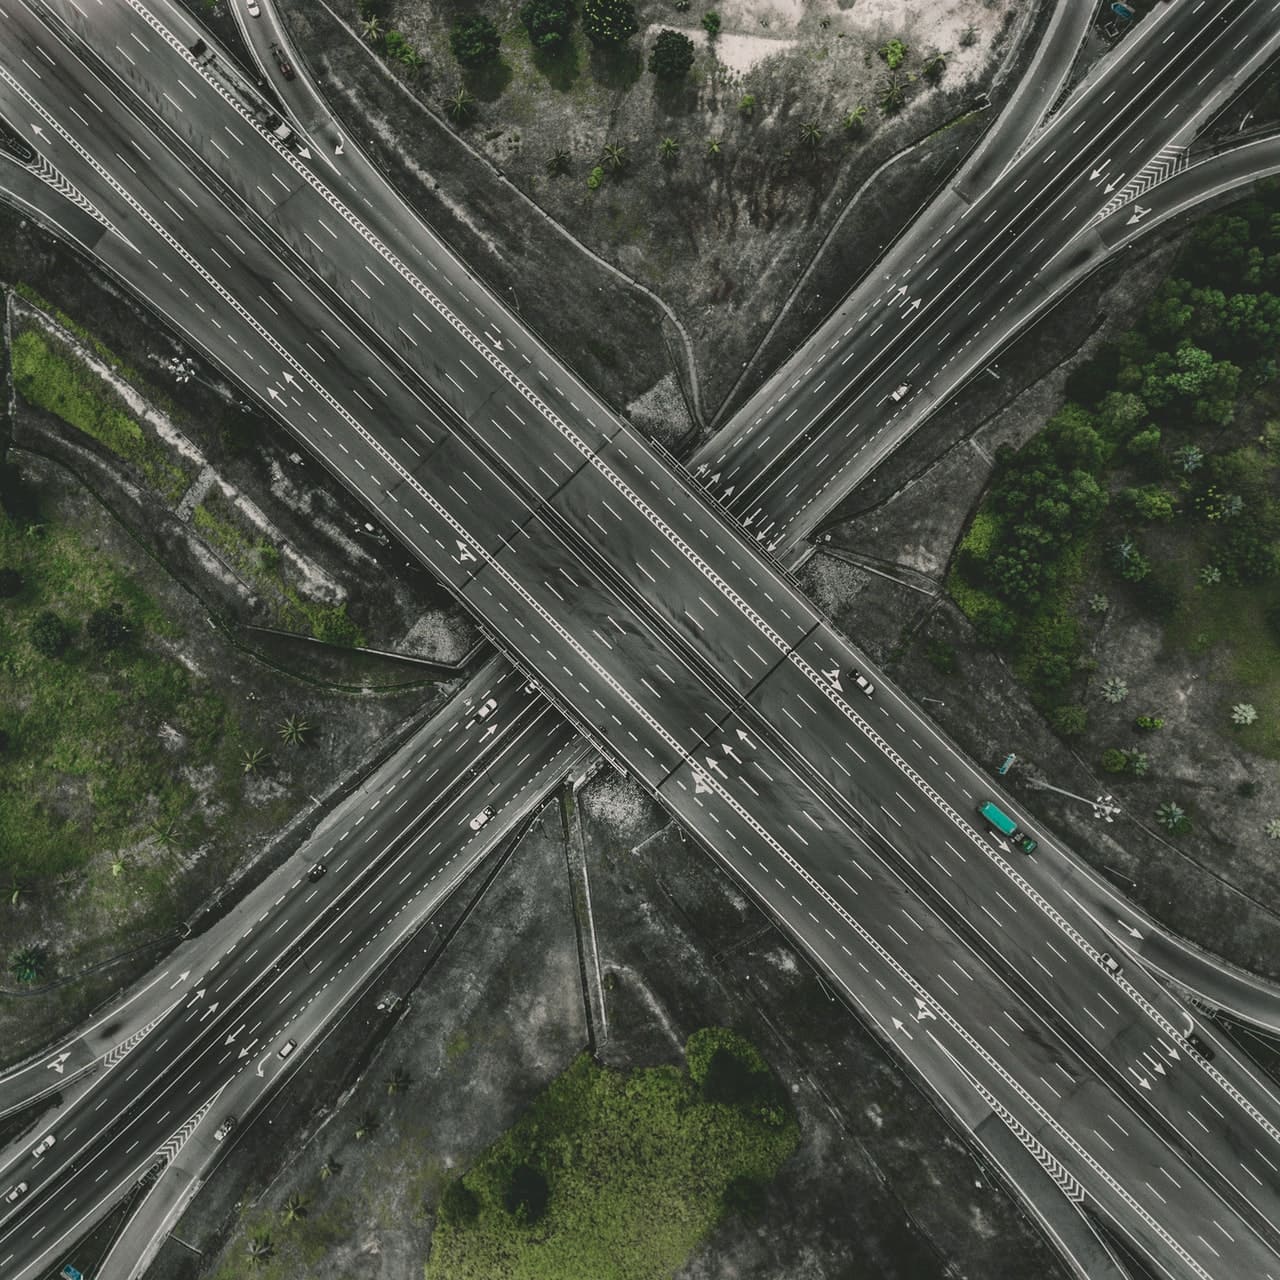 Drone image of many roads and overpasses winding past each other with vehicles travelling on them.